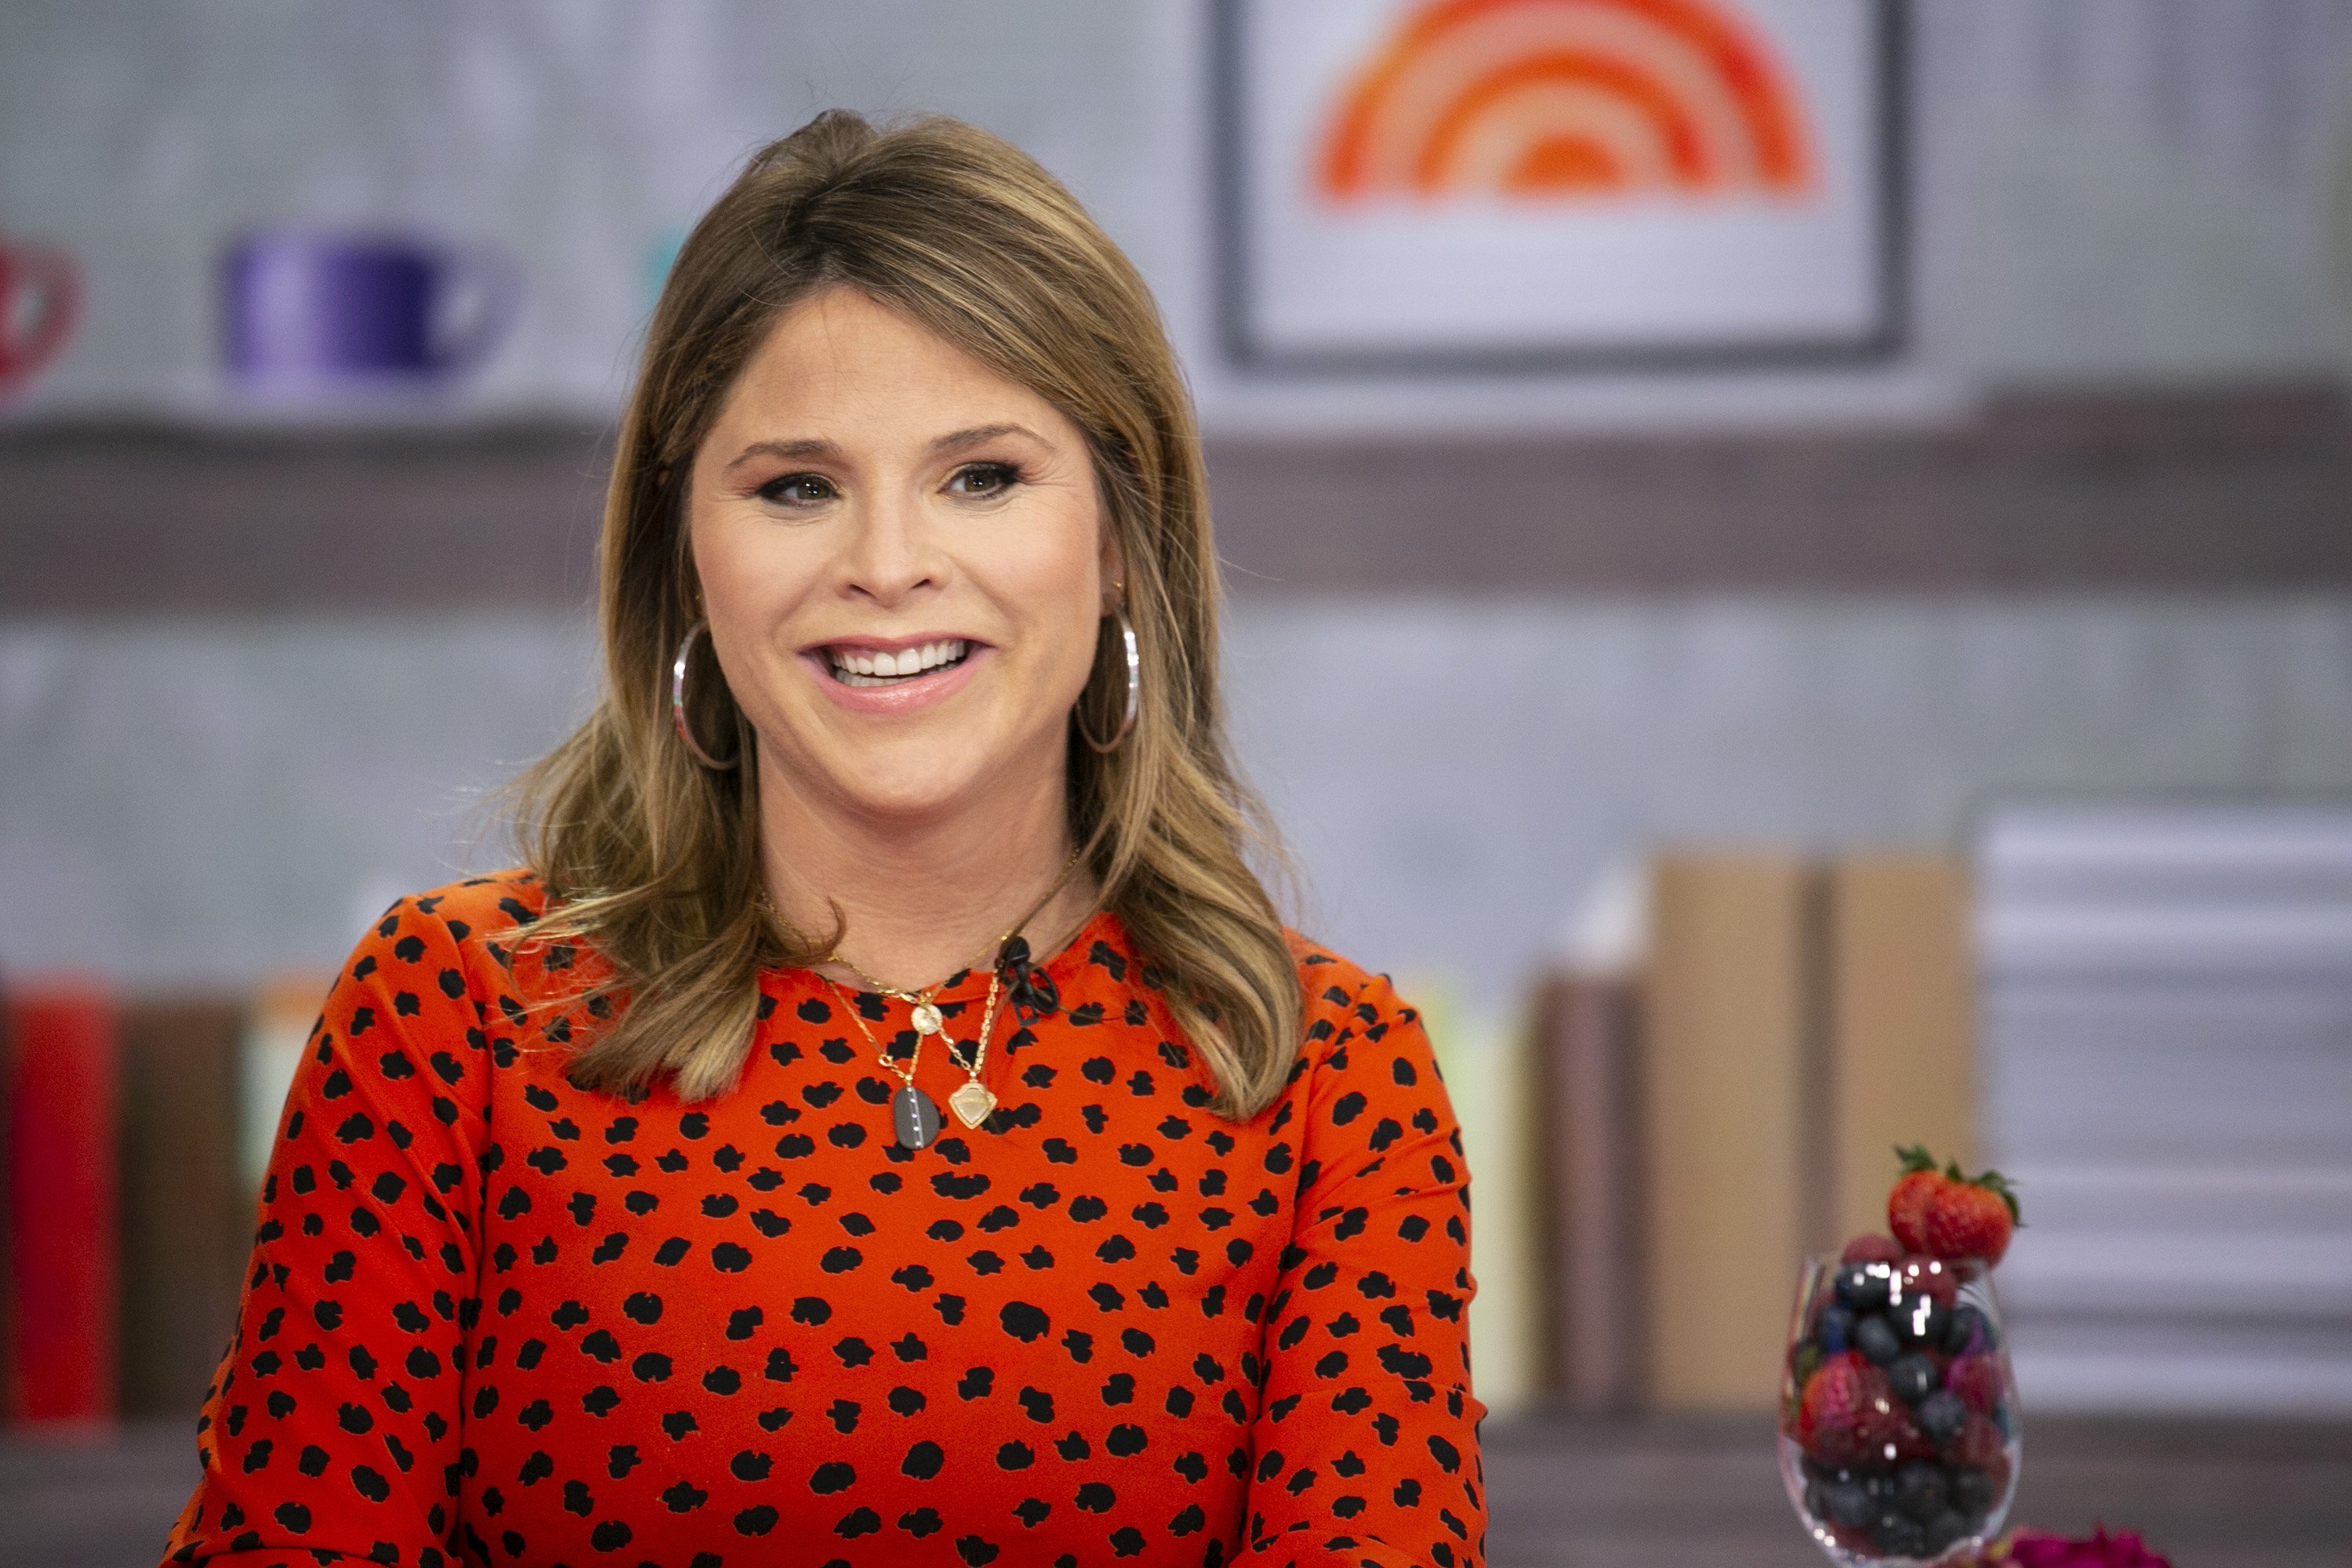 Jenna Bush Hager on "TODAY"  Monday May 13, 2019 | Photo: GettyImages